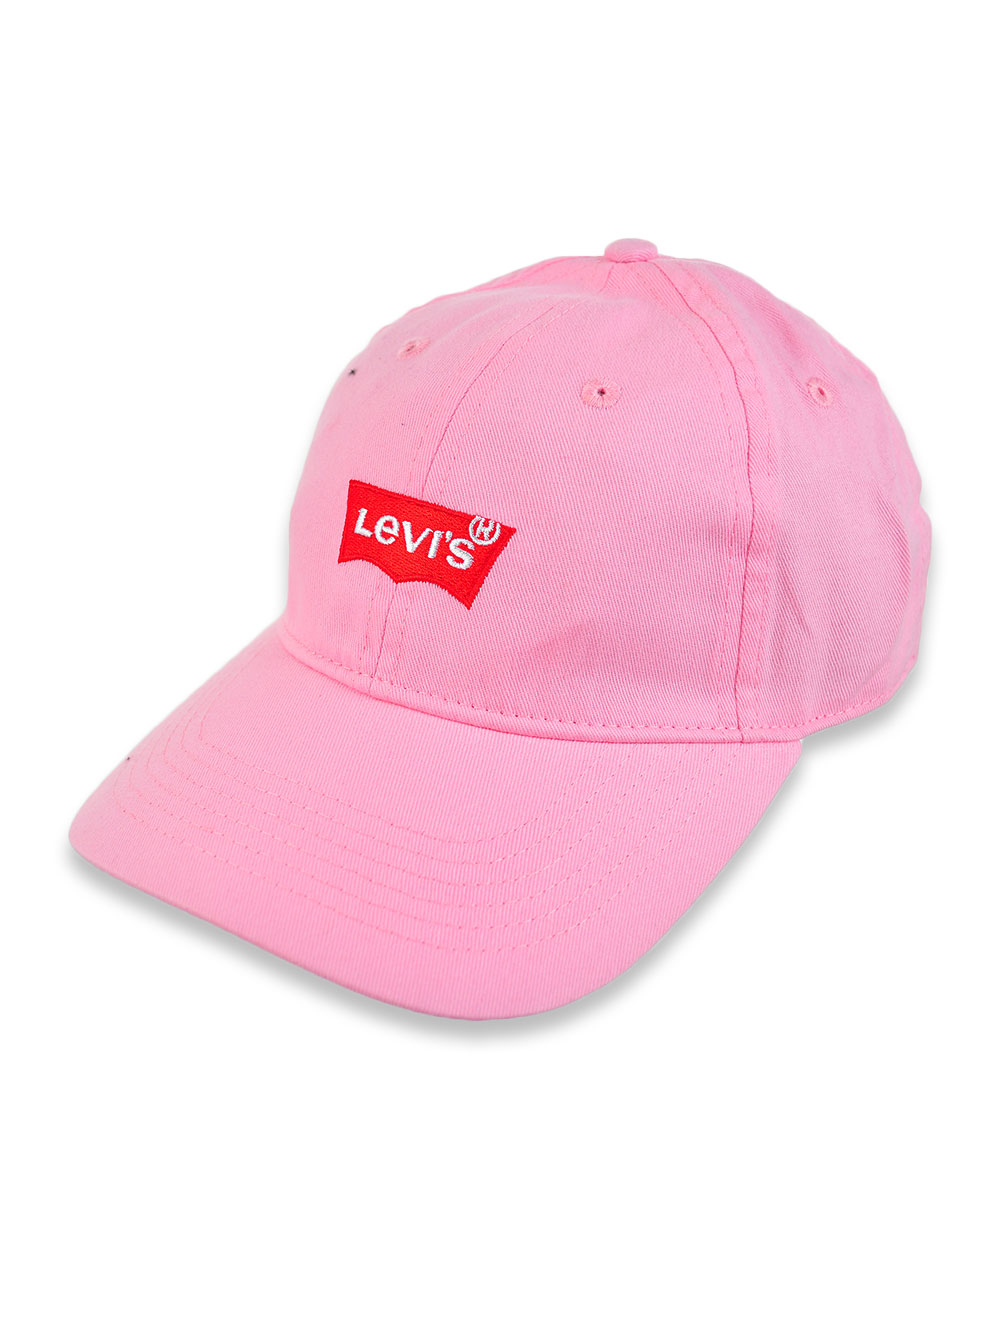 Toddler and Youth Levi's Baseball Cap